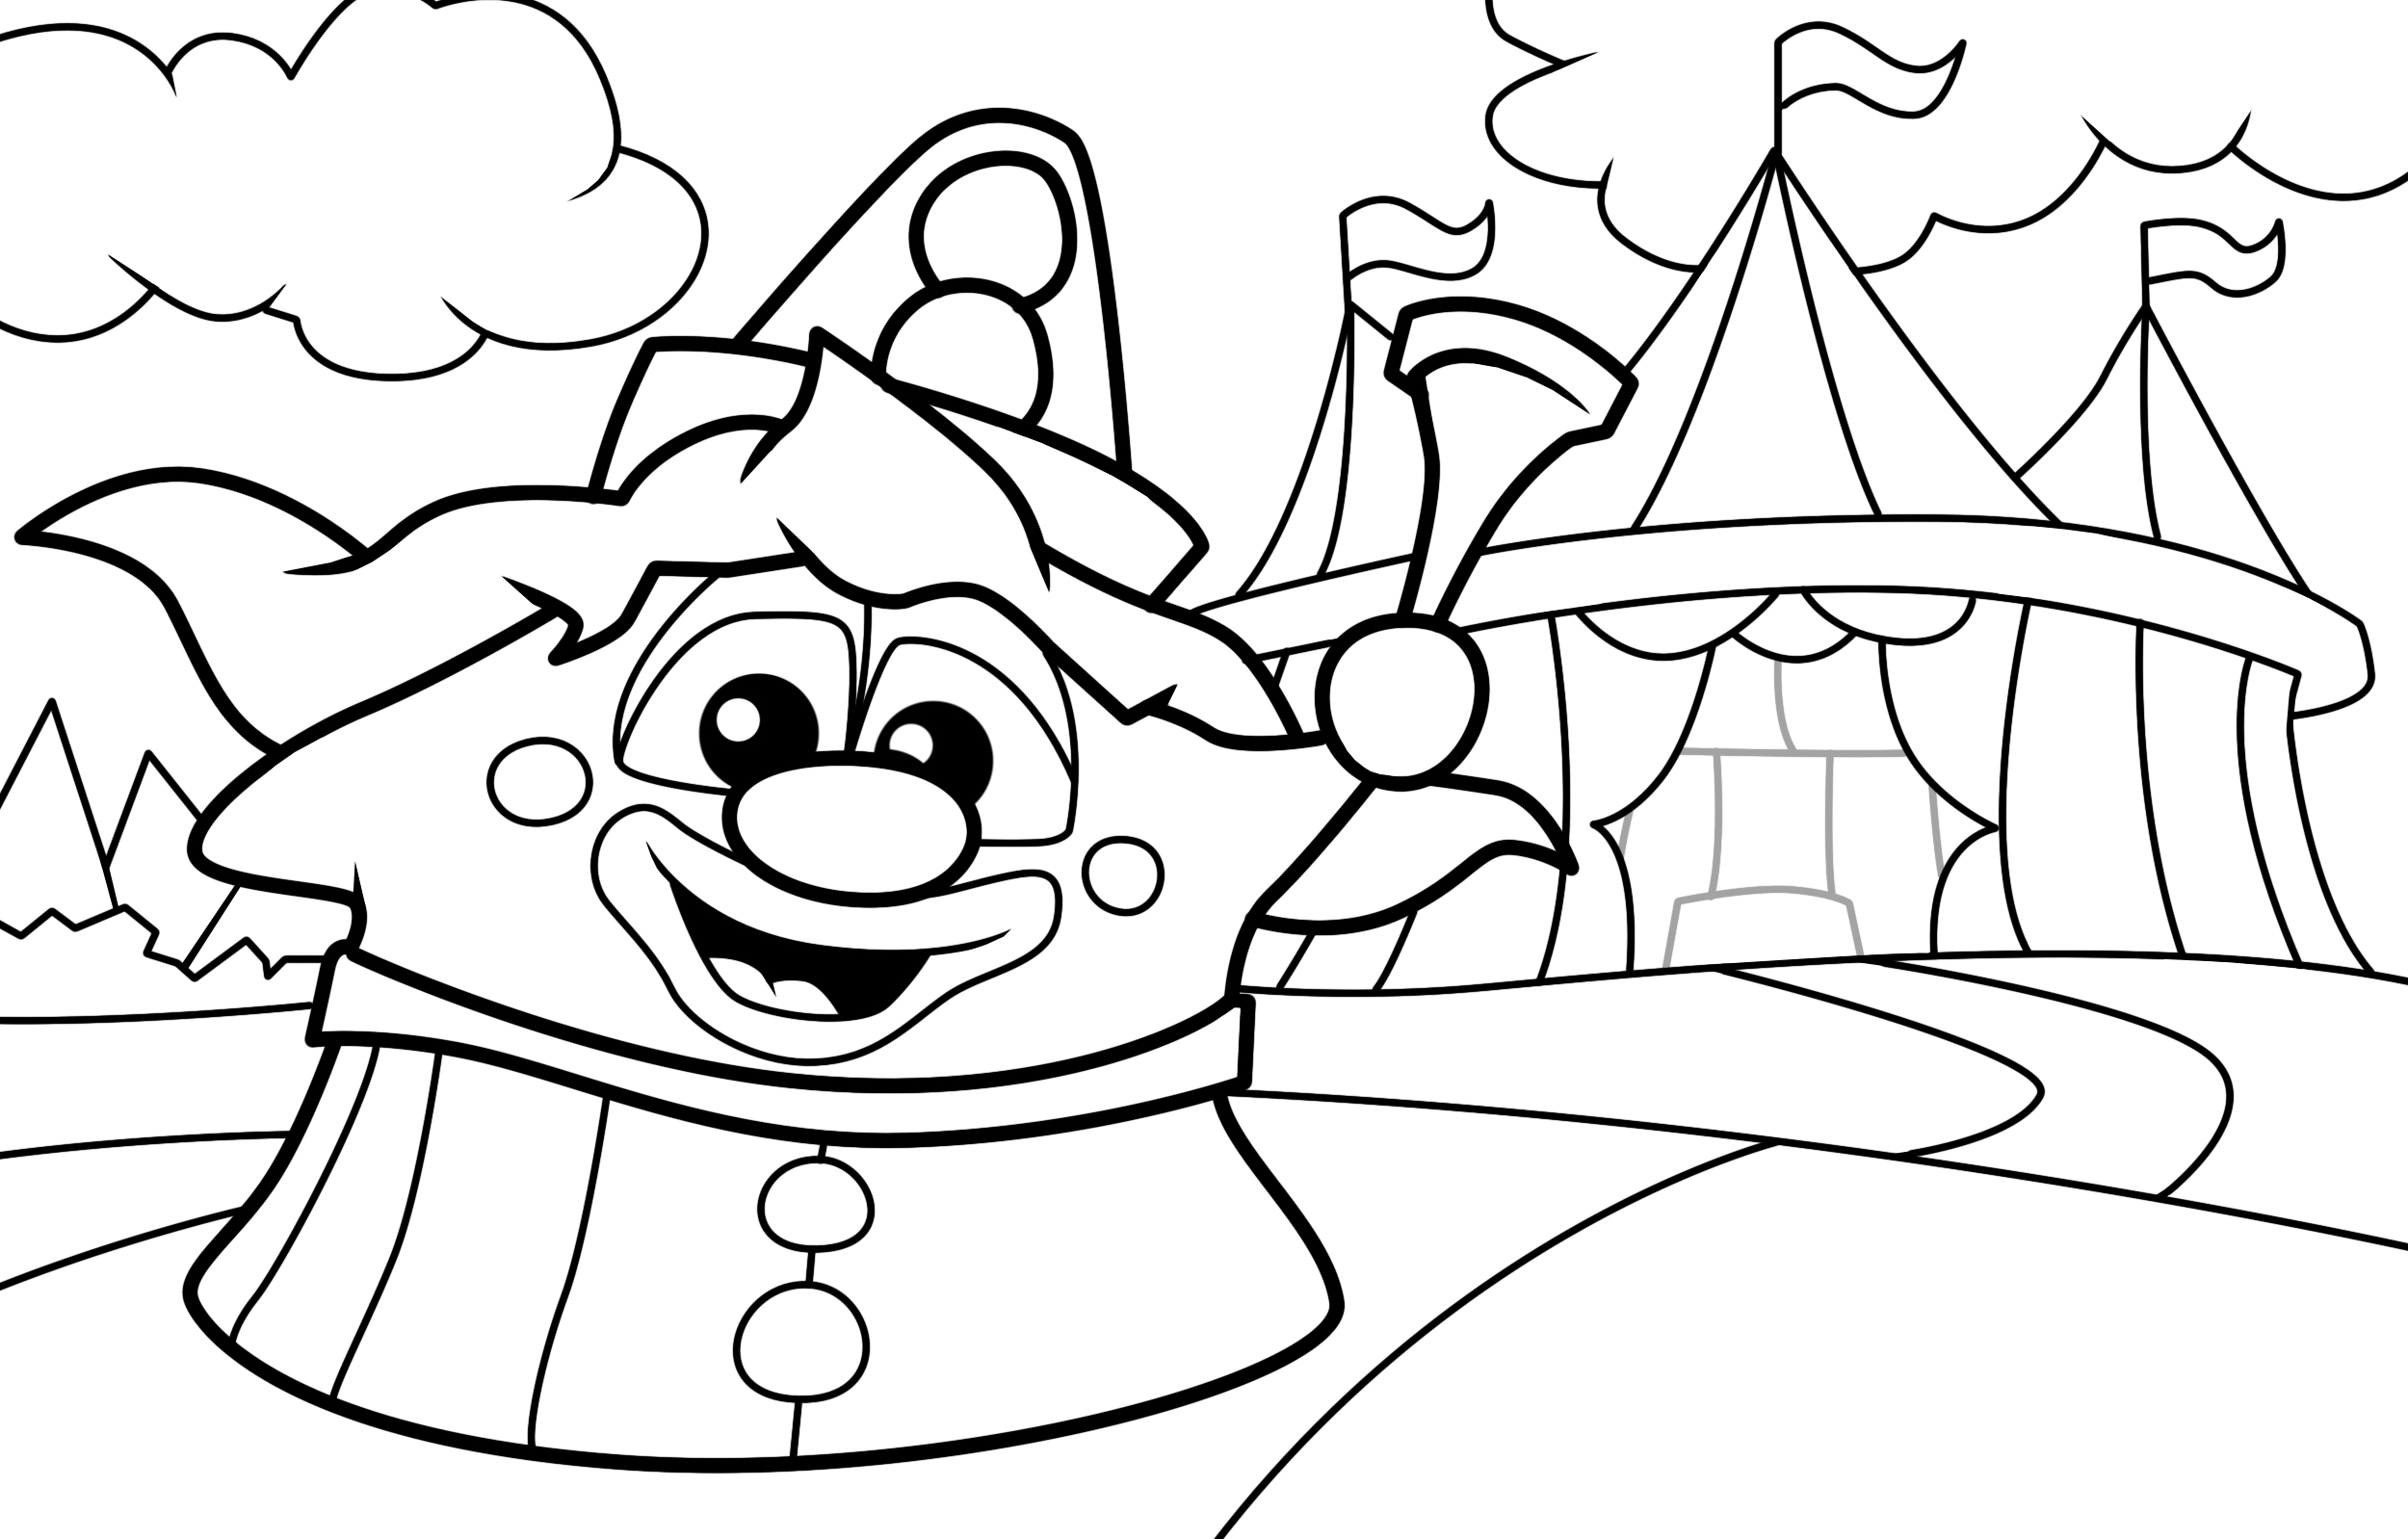 coloring pages for your kids - grocots.com